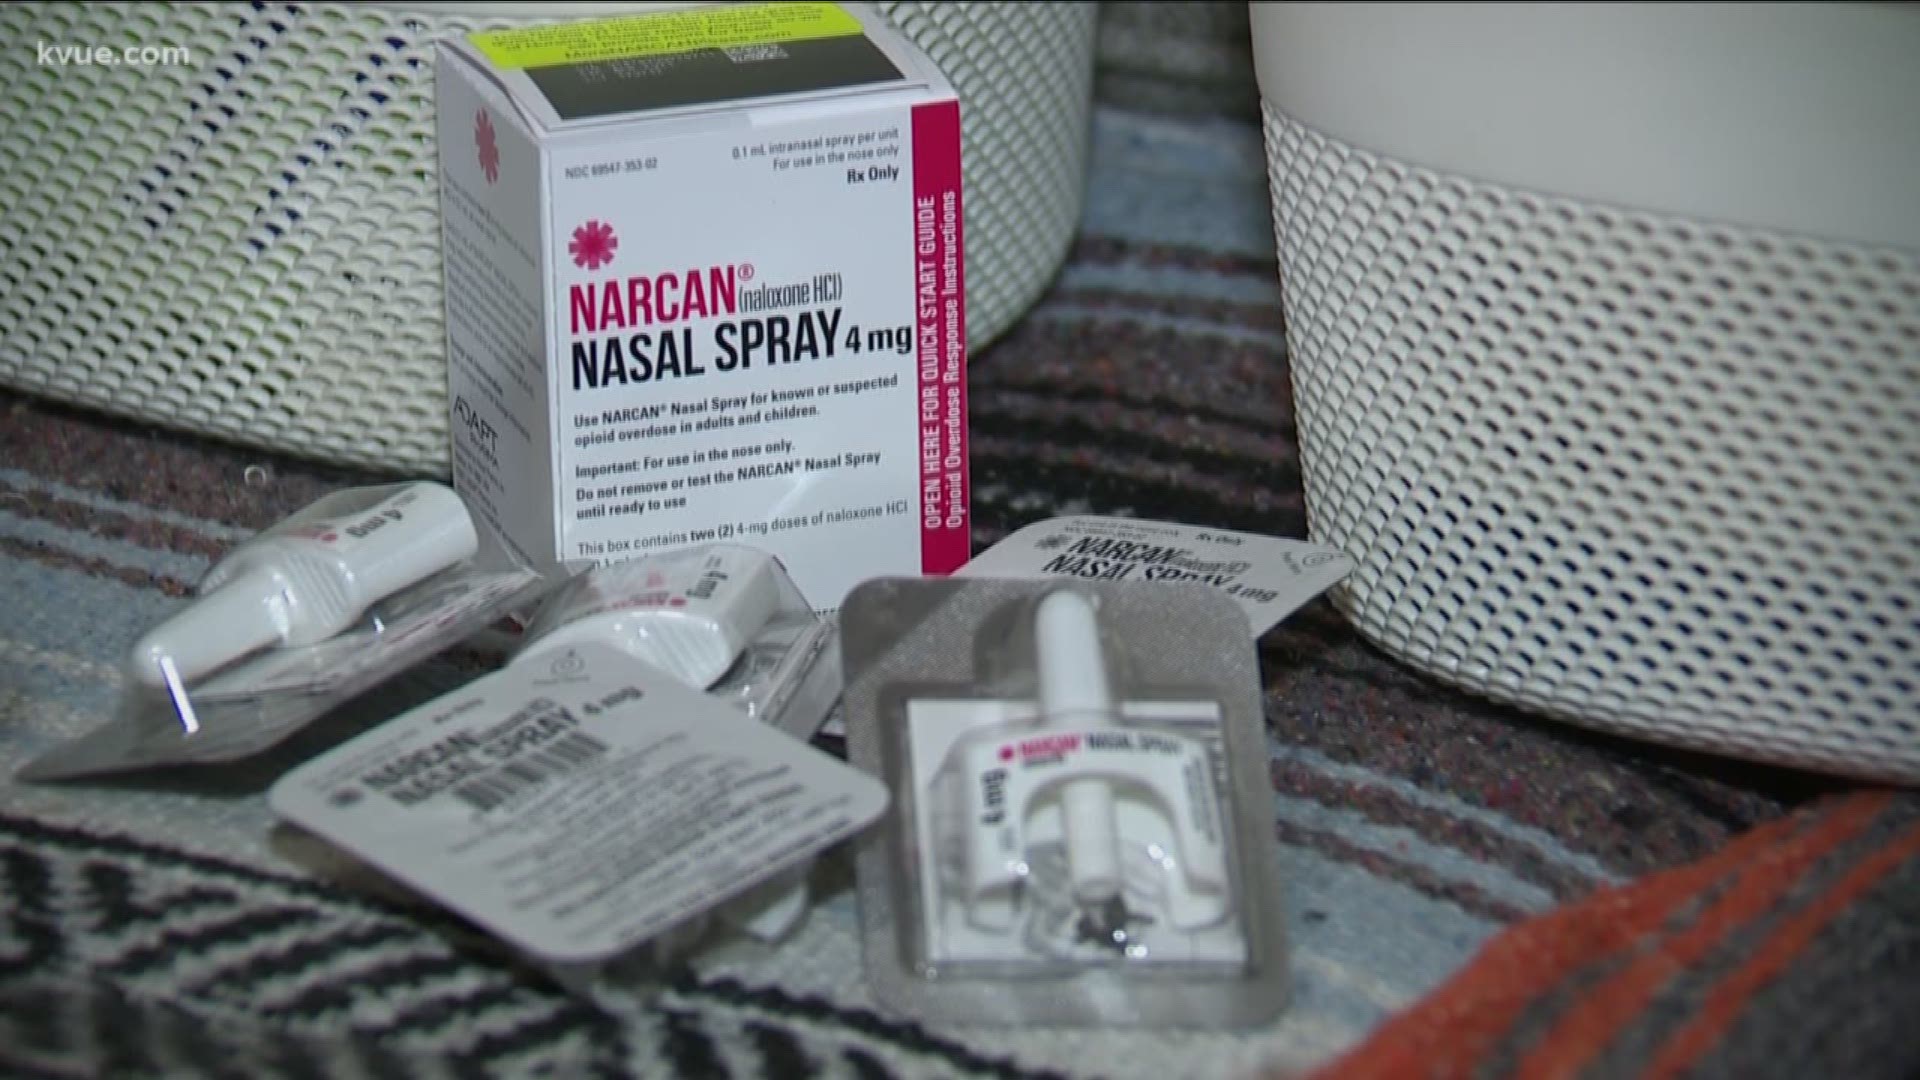 Austin PD received enough of the opioid overdose reversal drug NARCAN to equip the entire force, thanks to a donation from the Texas Overdose Naloxone Initiative.